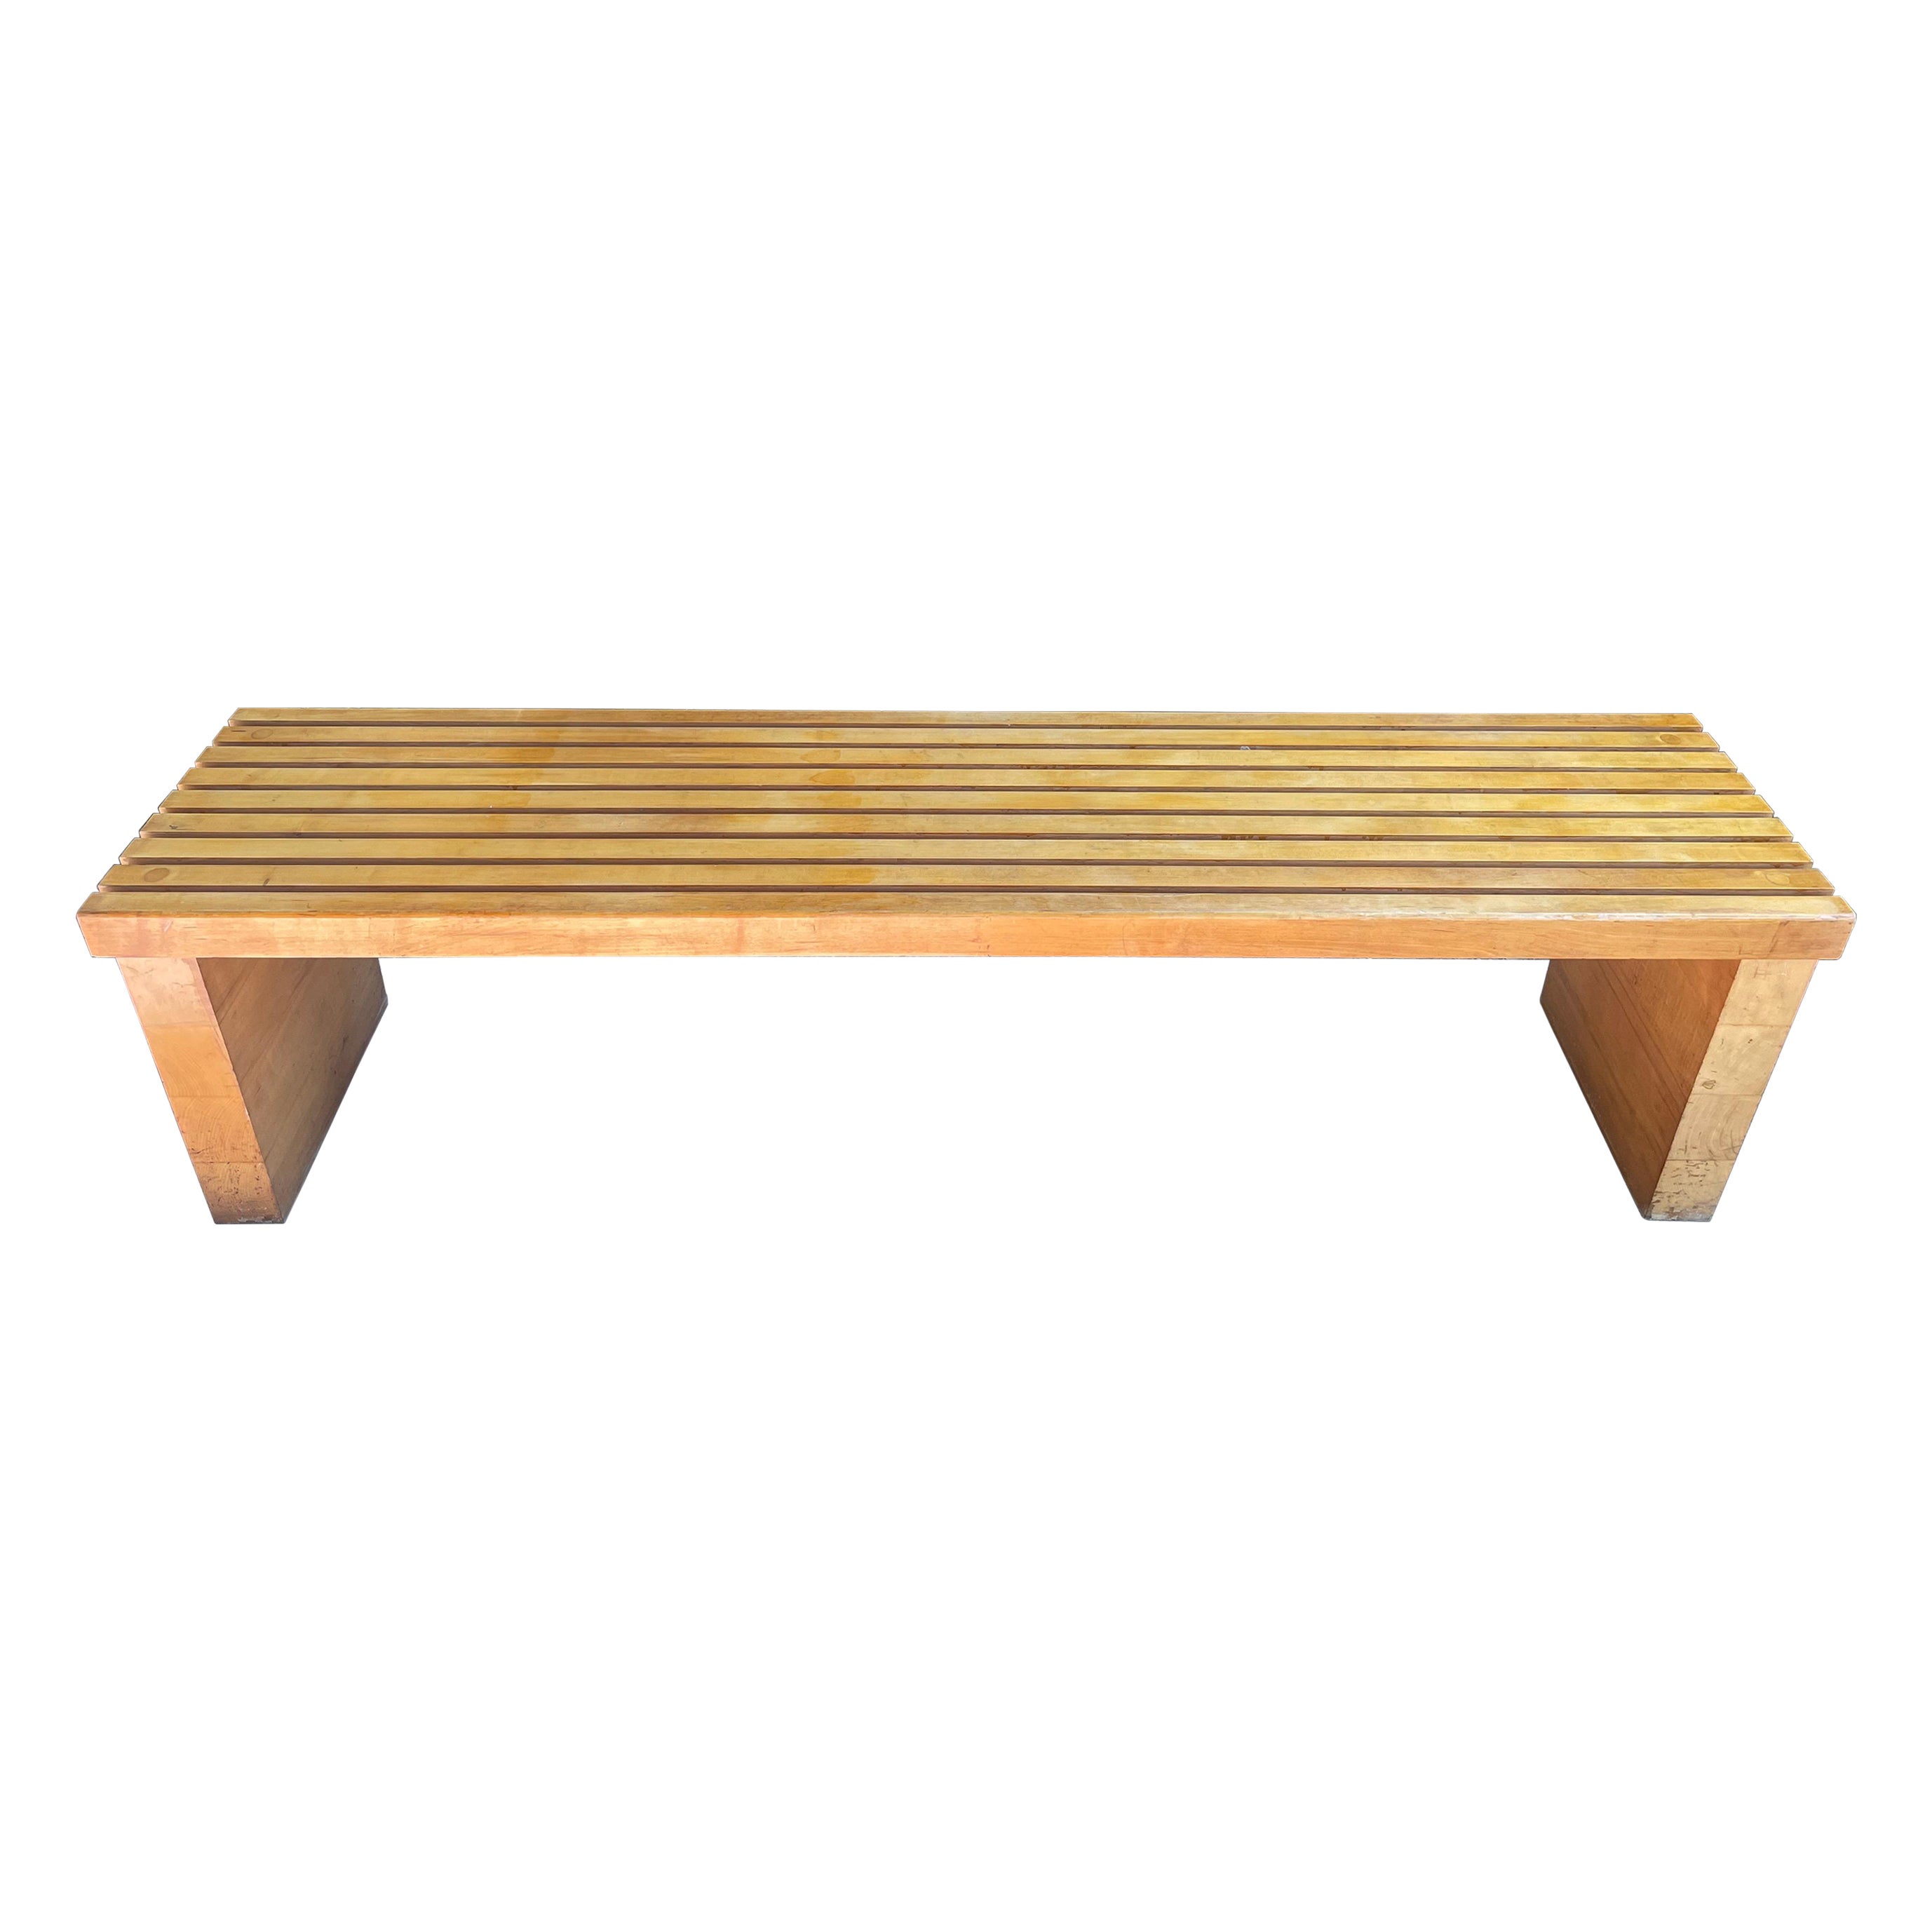 Extra Long Heavy Vintage Maple Wood Slatted Bench For Sale